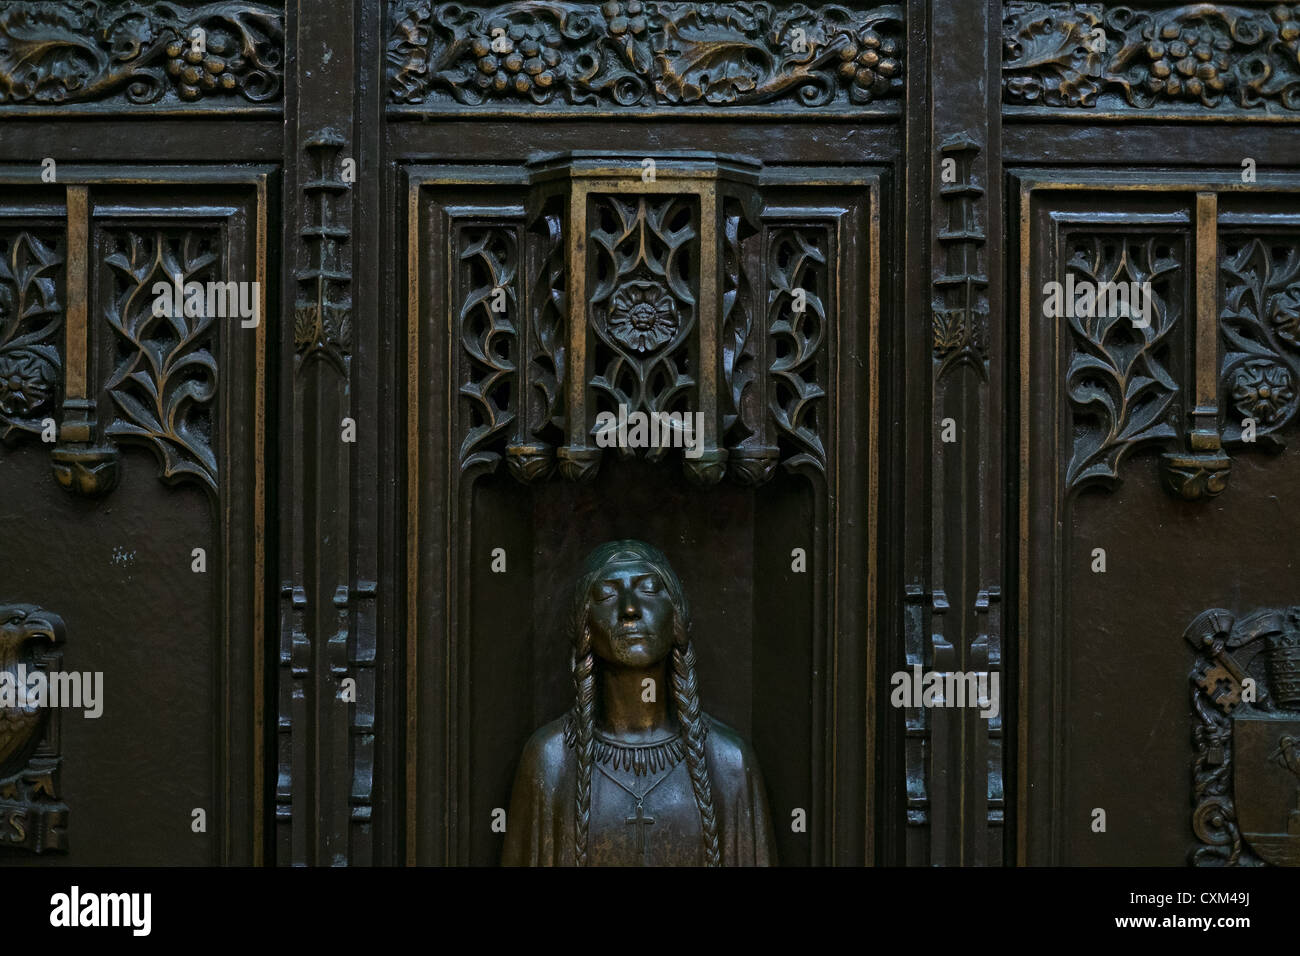 Figure of Kateri Tekakwitha on door to St. Patrick's Cathedral, New York, NY, US. Stock Photo